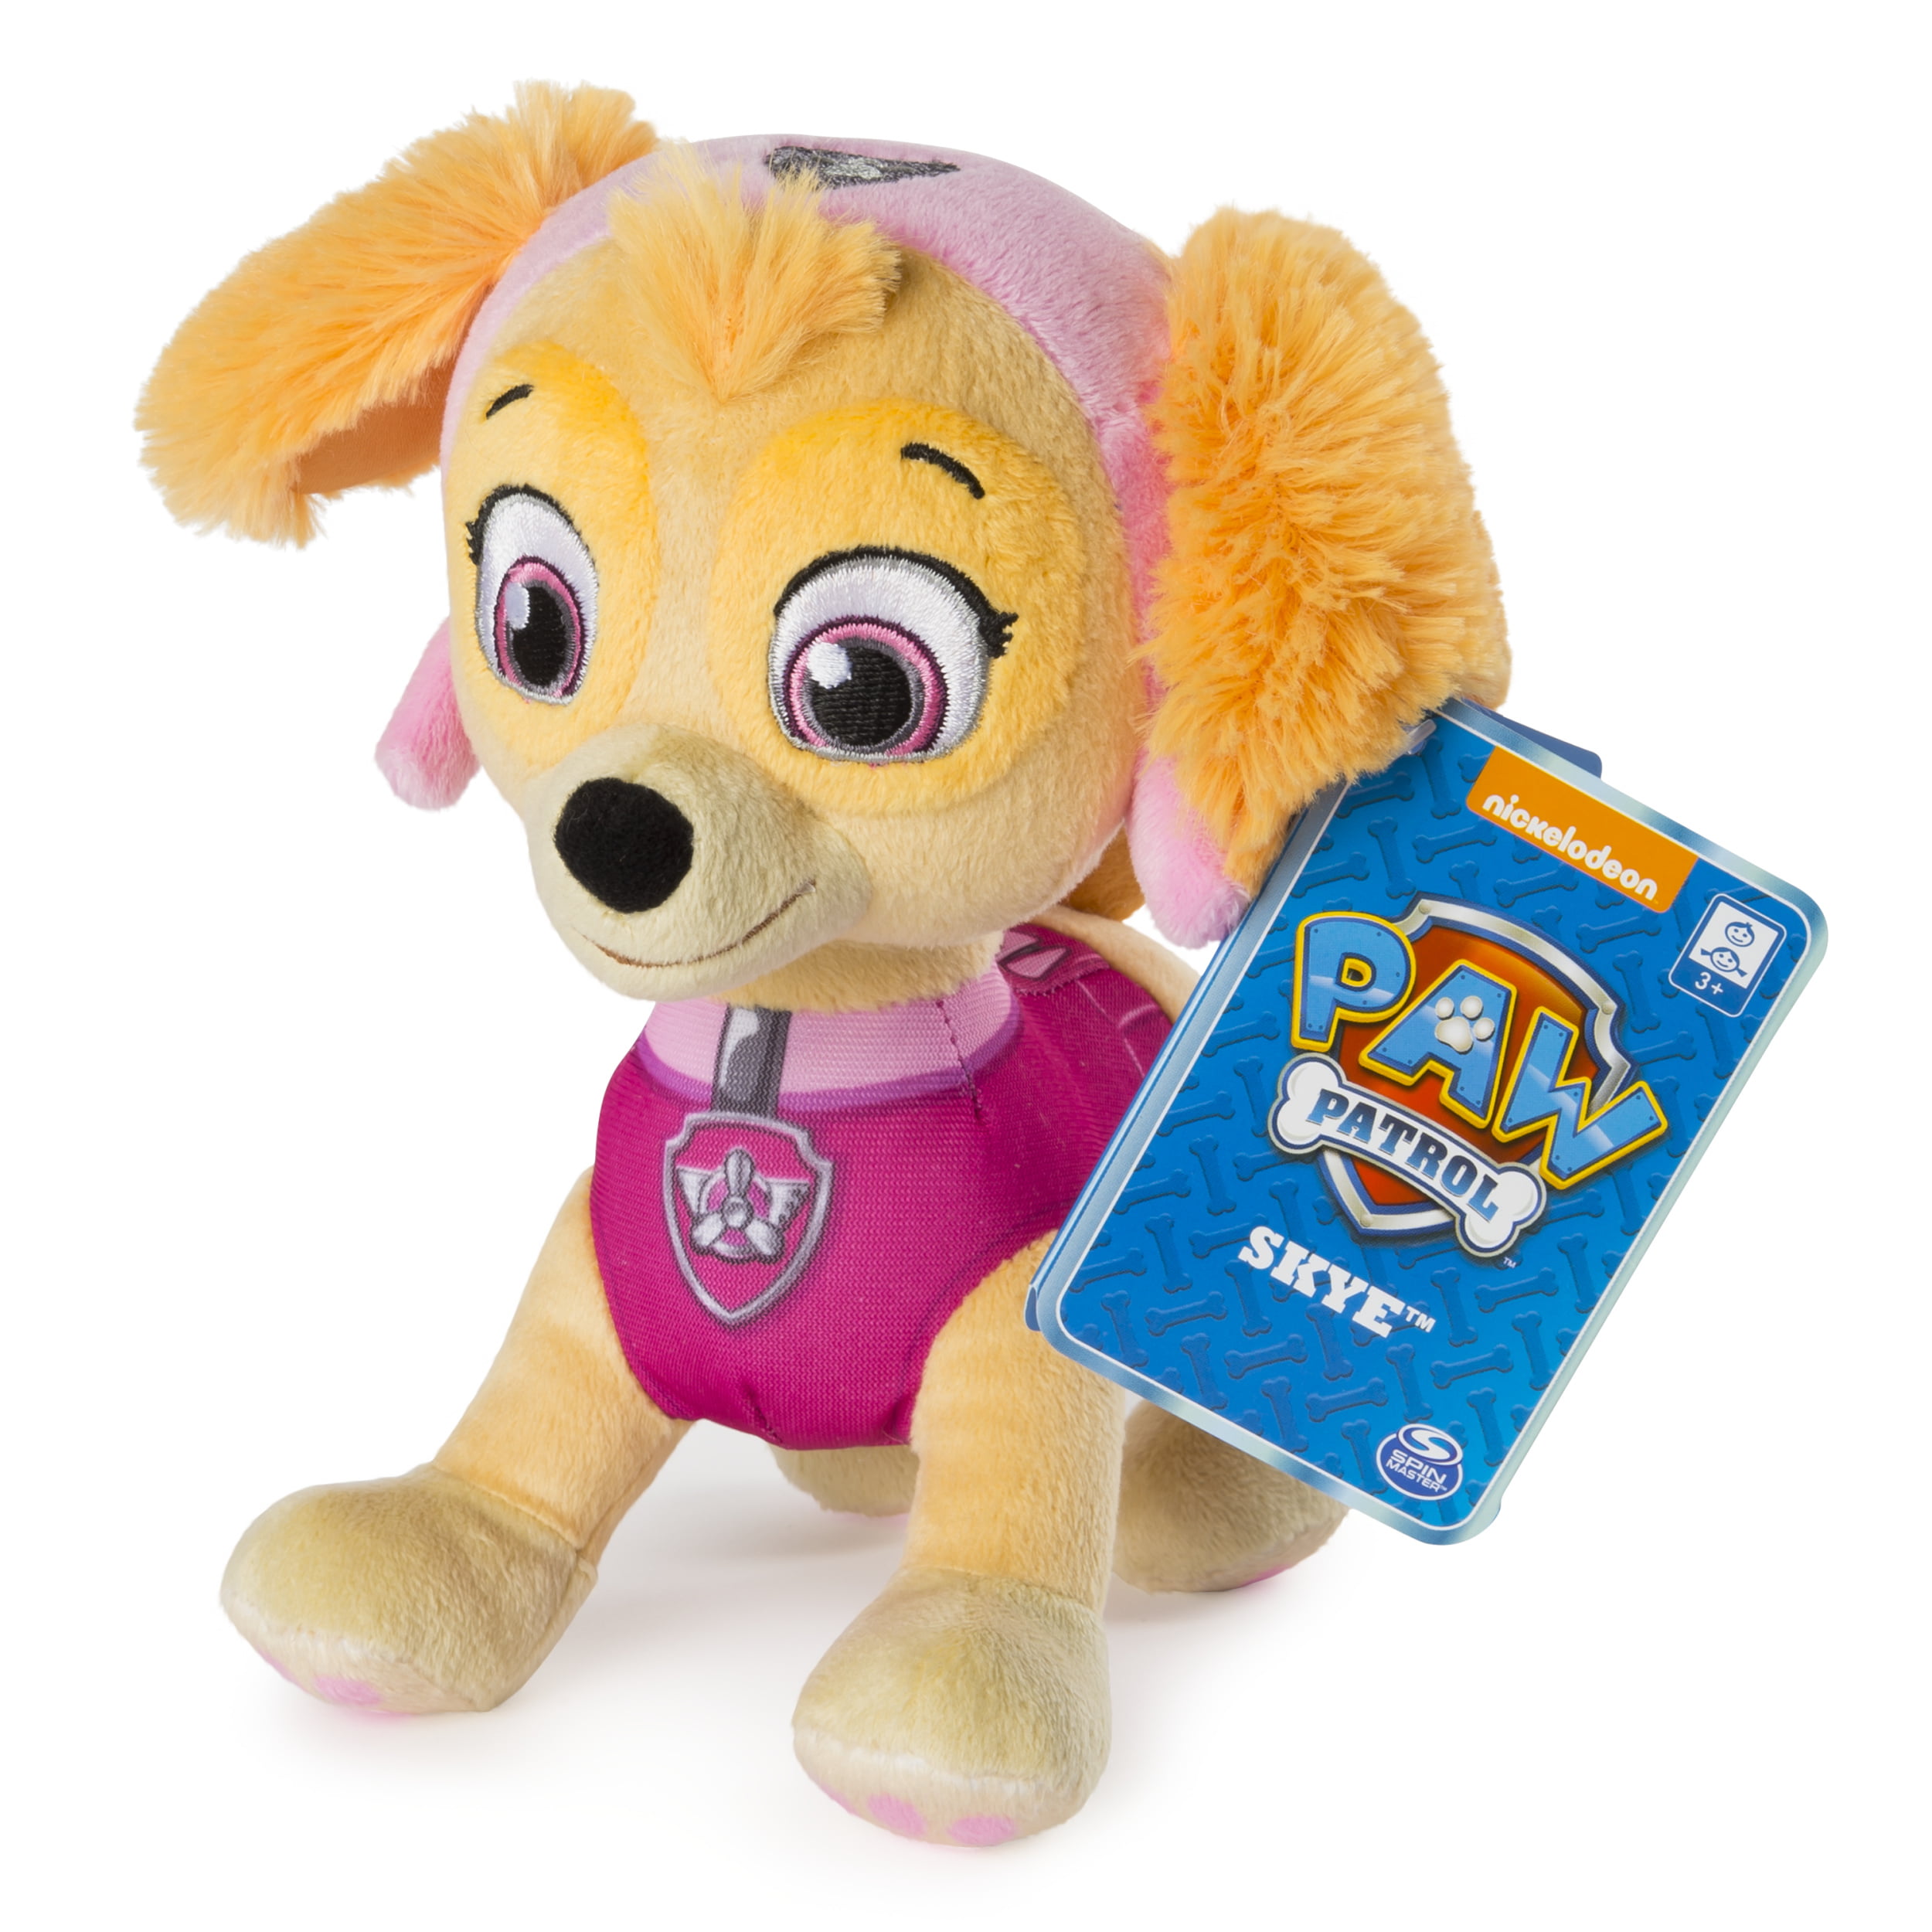 Patrol – 8” Skye Plush Toy, Standing Plush Detailing, Ages 3 and up - Walmart.com